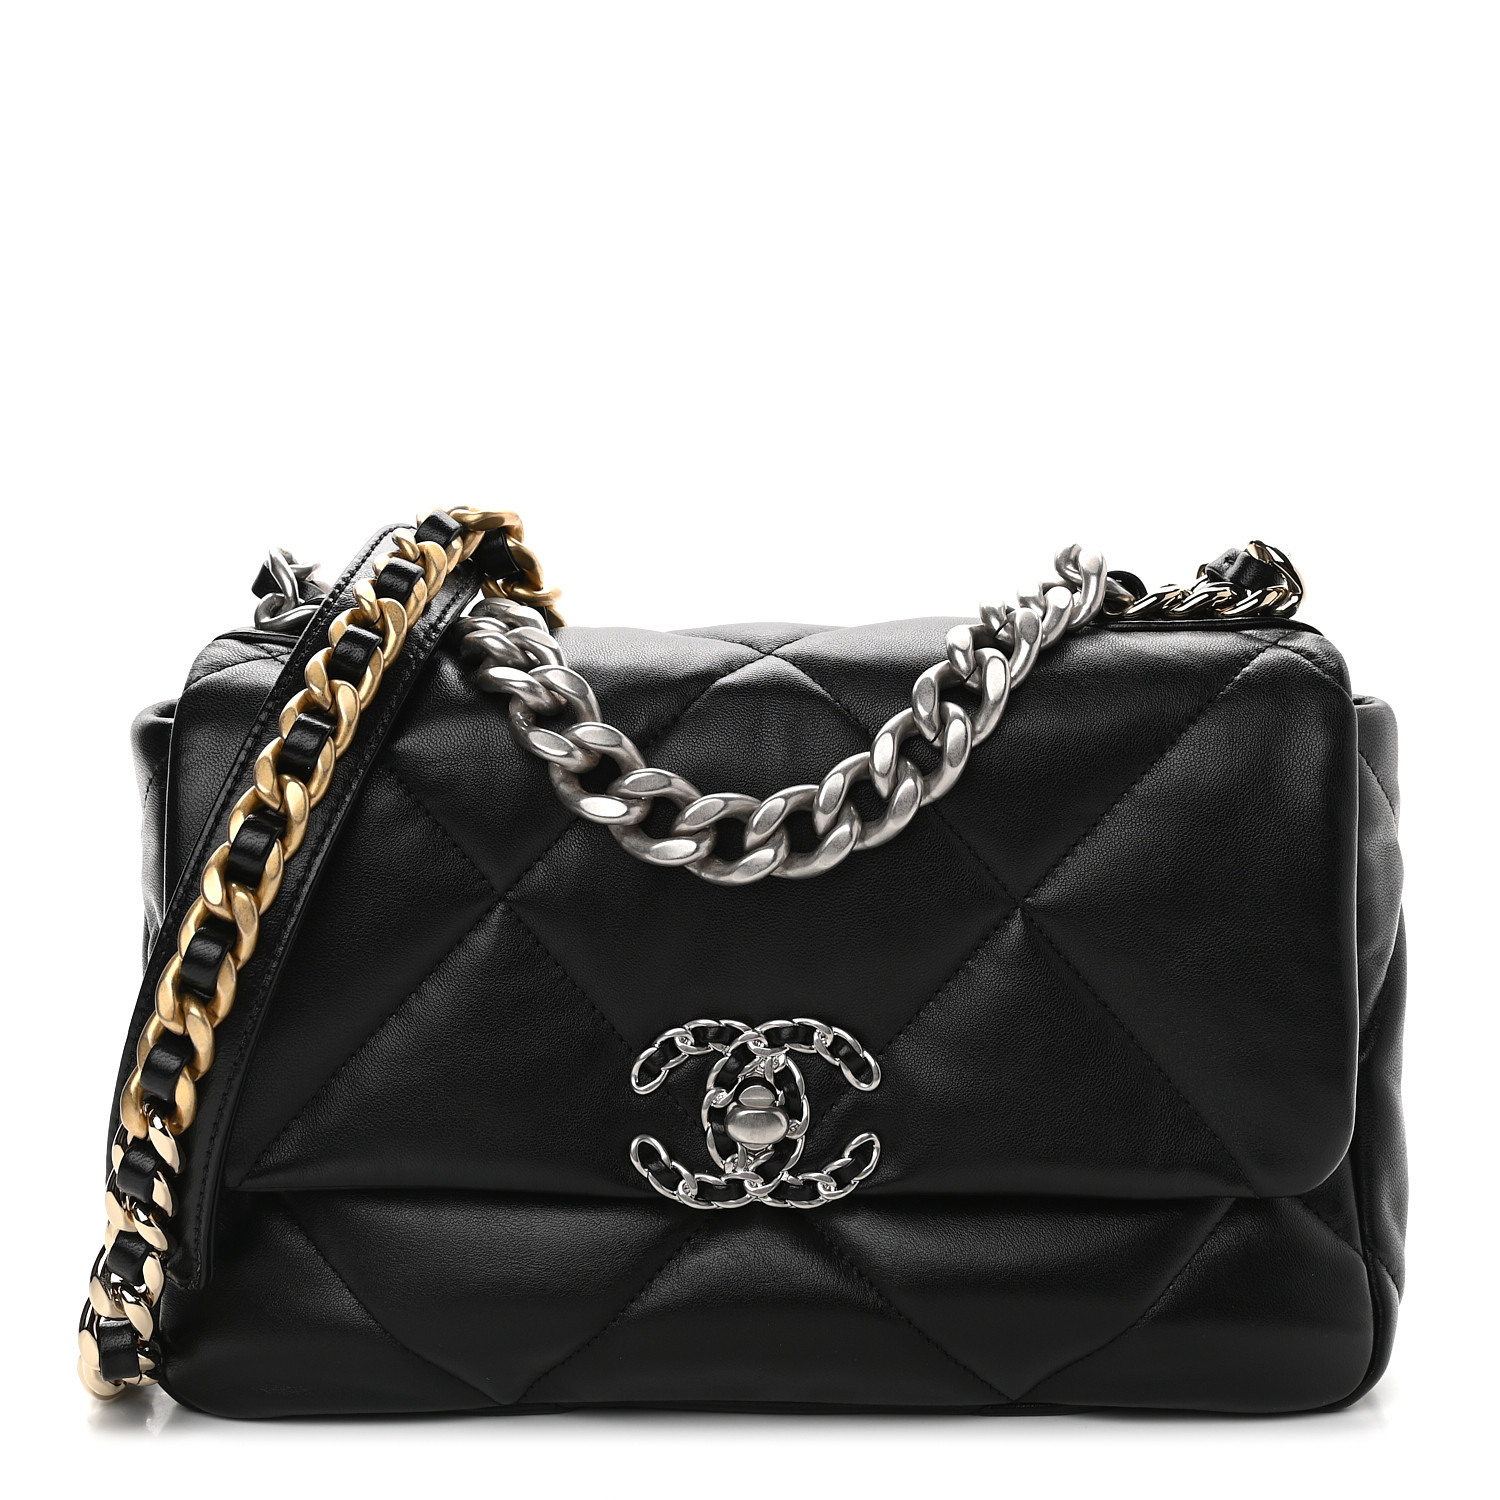 Chanel Lambskin Quilted Medium Chanel 19 Flap Black Finland, SAVE 48% 